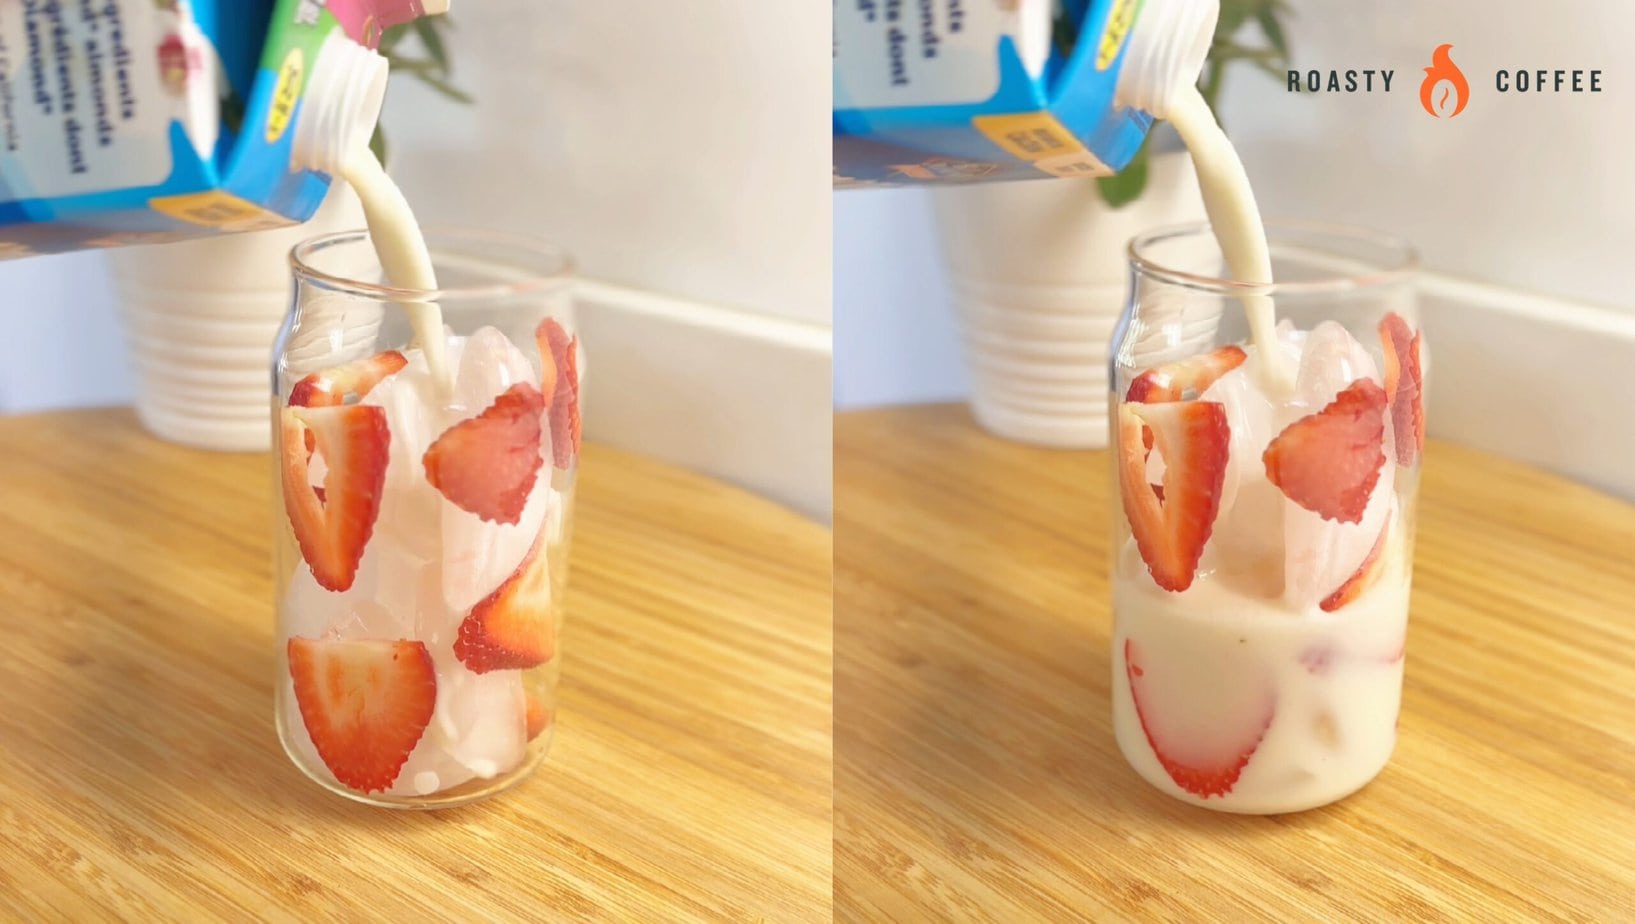 adding milk to a glass with strawberry slices and ice